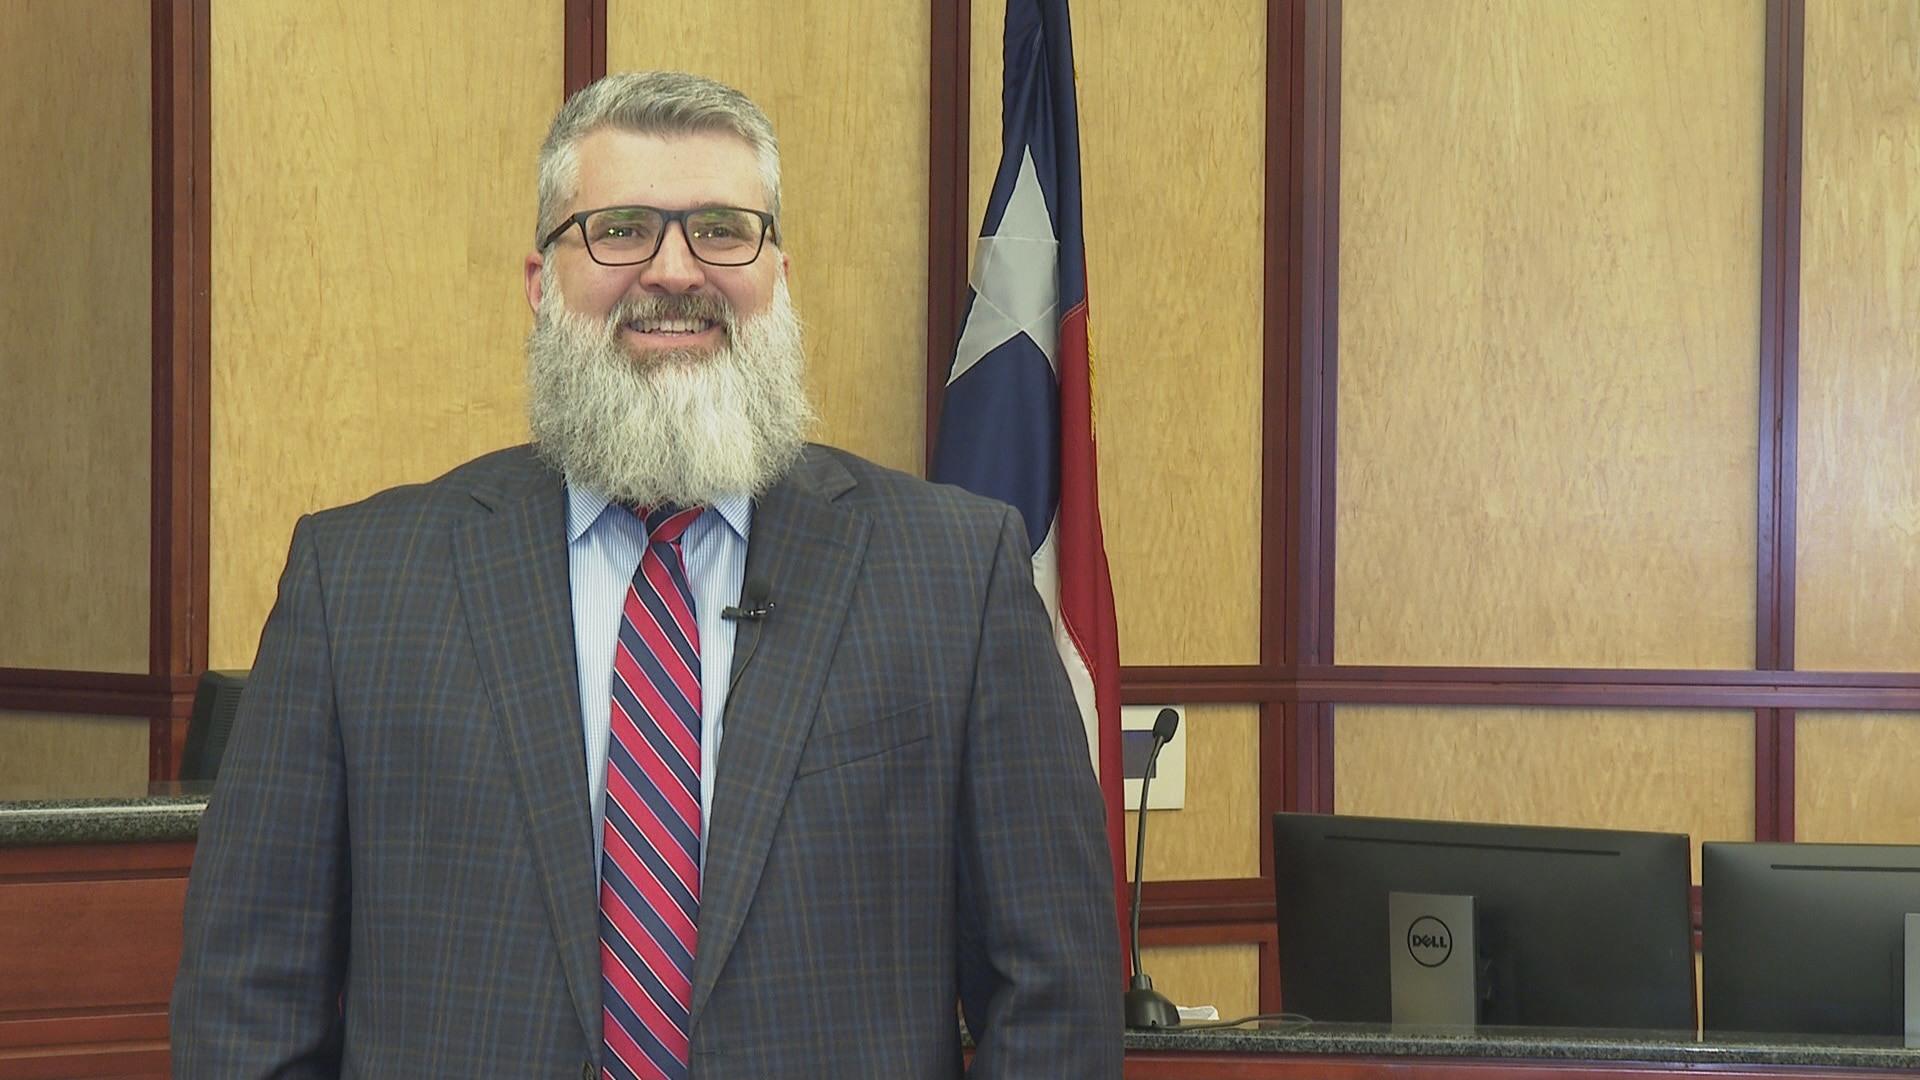 Incoming Brazos County 472nd District Judge shares vision for new court